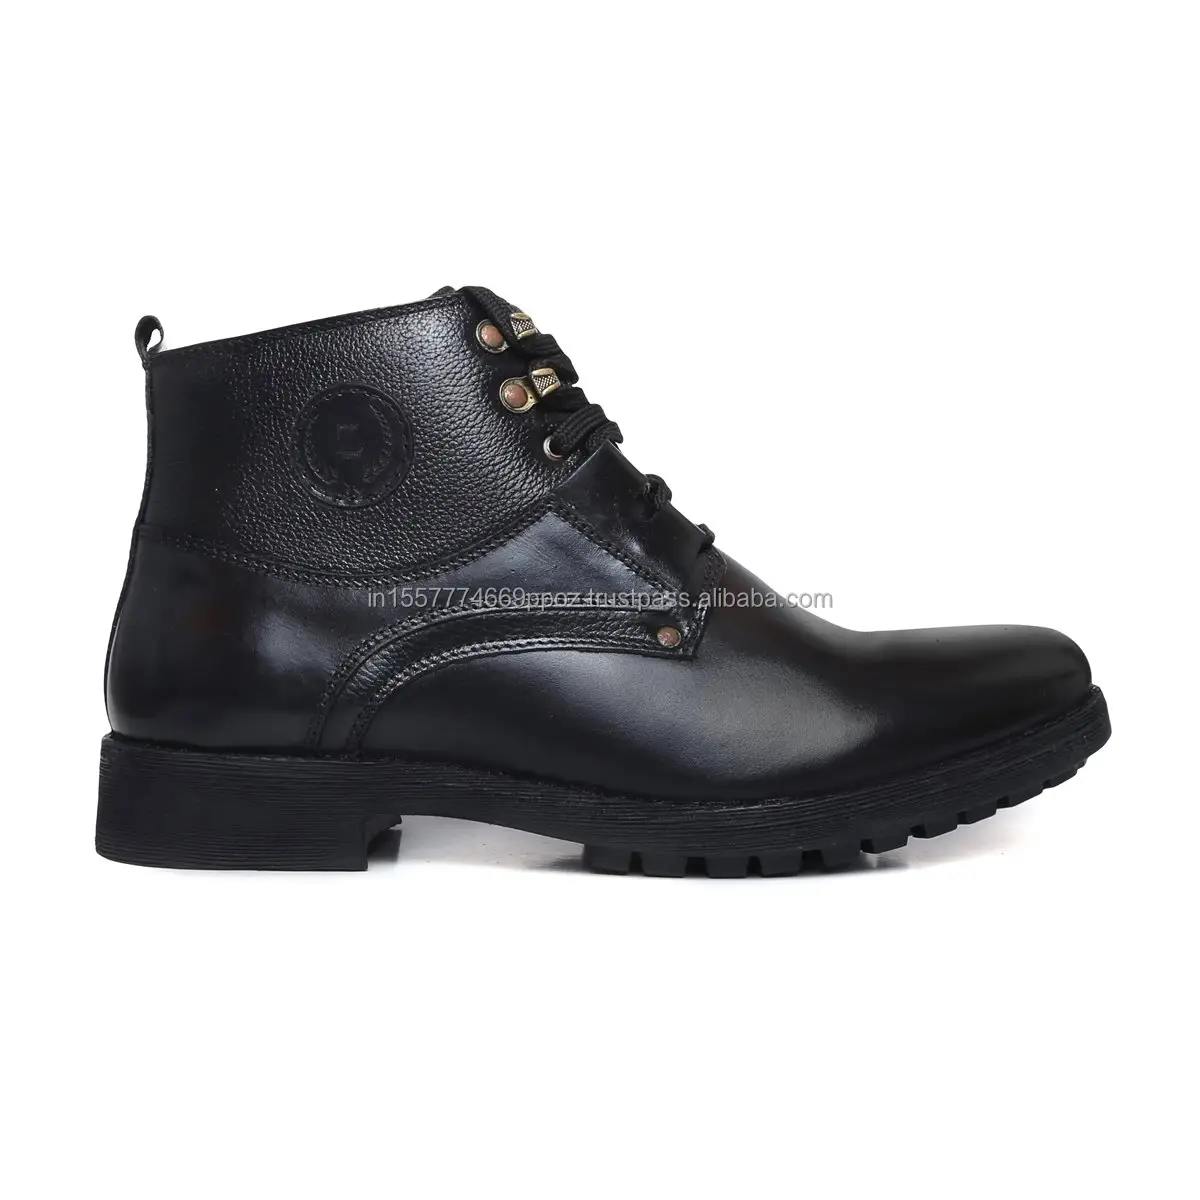 Men Genuine Leather Boots Formal And Casual Wear Fashion Trendy Shoes Pure Leather Boots Outdoor Wear Hiking And Office